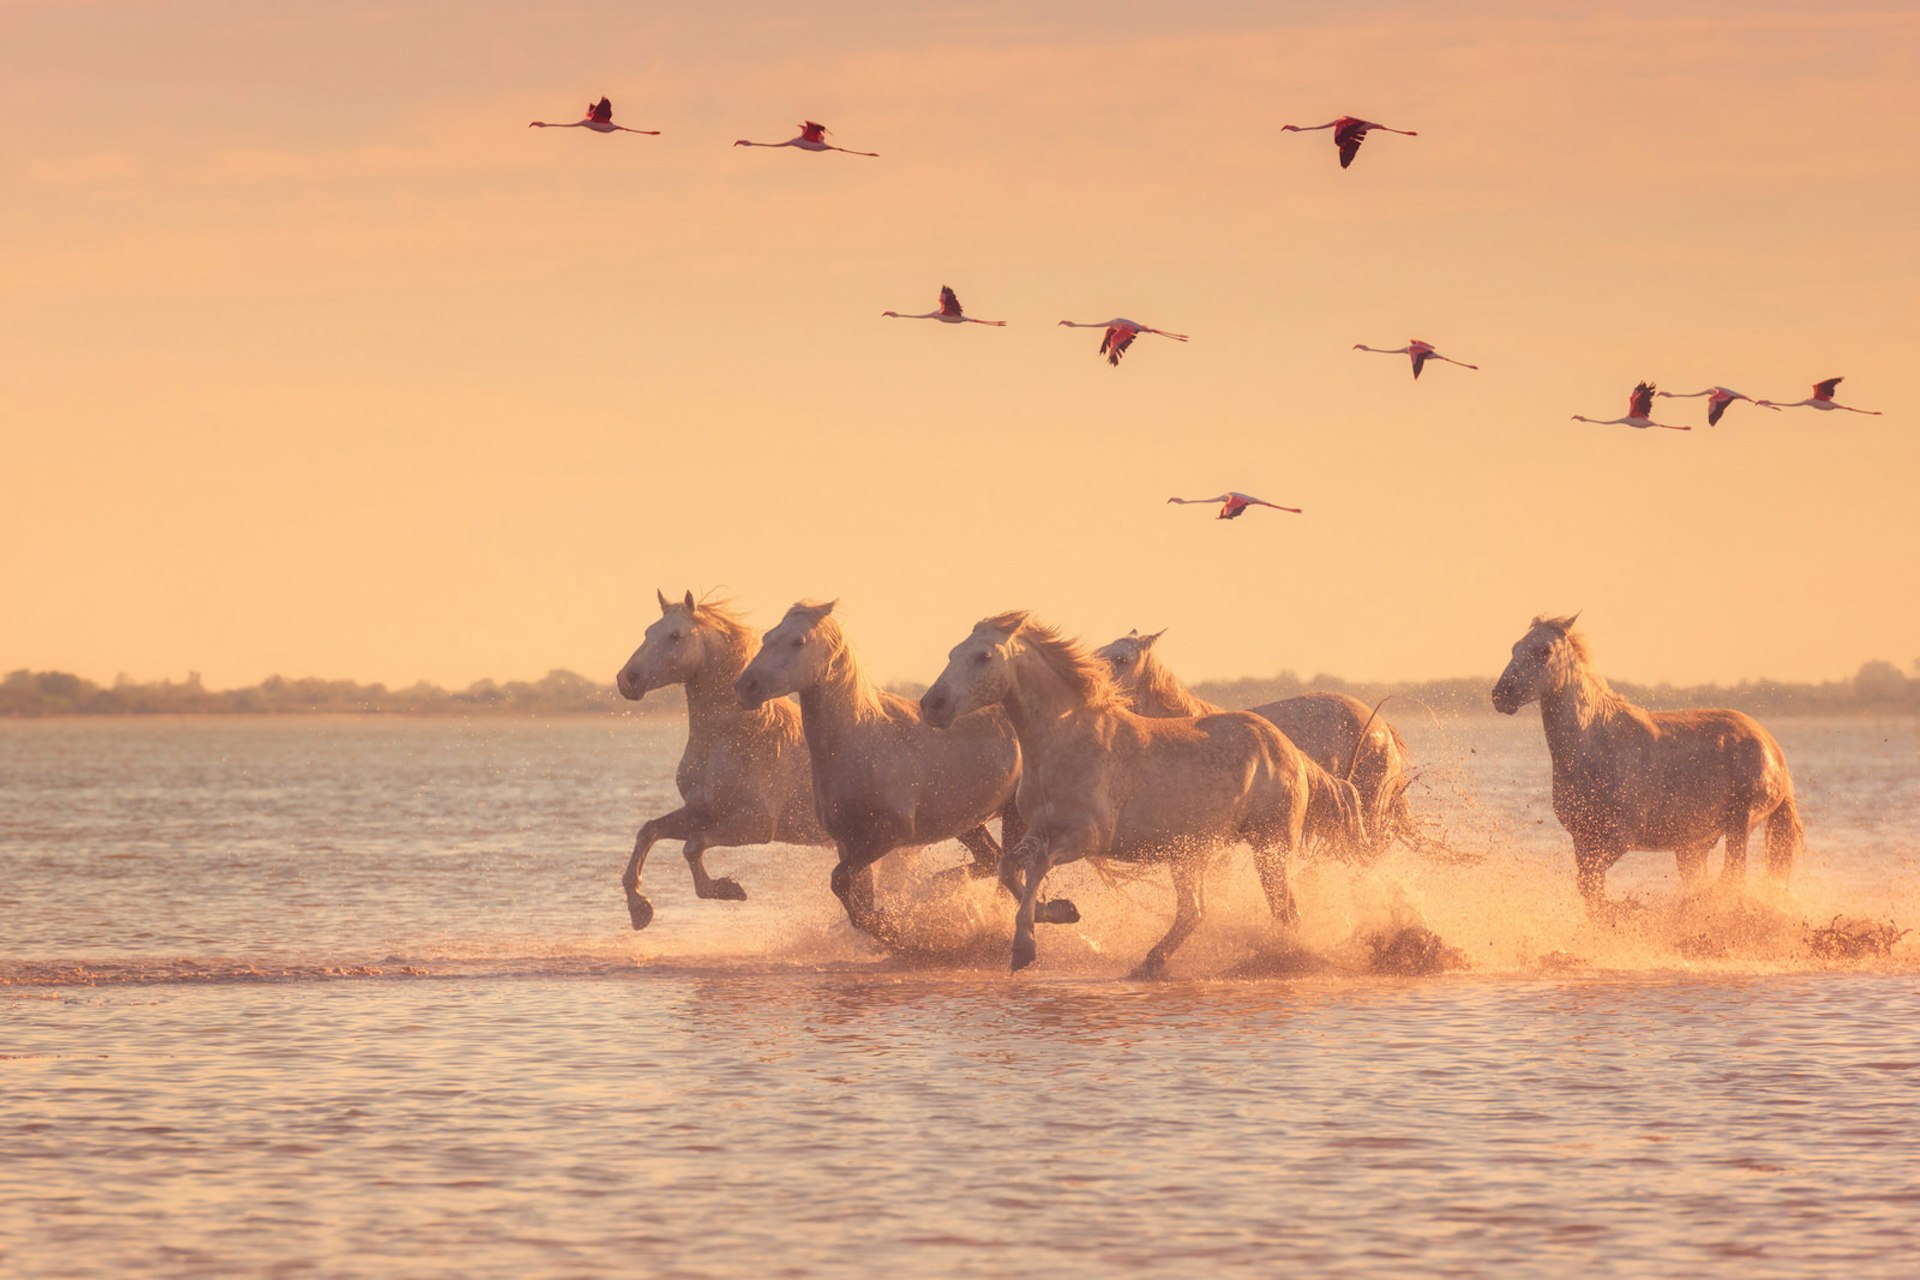 White horses and pink flamingos in the Camargue, France © Uhryn Larysa / Shutterstock